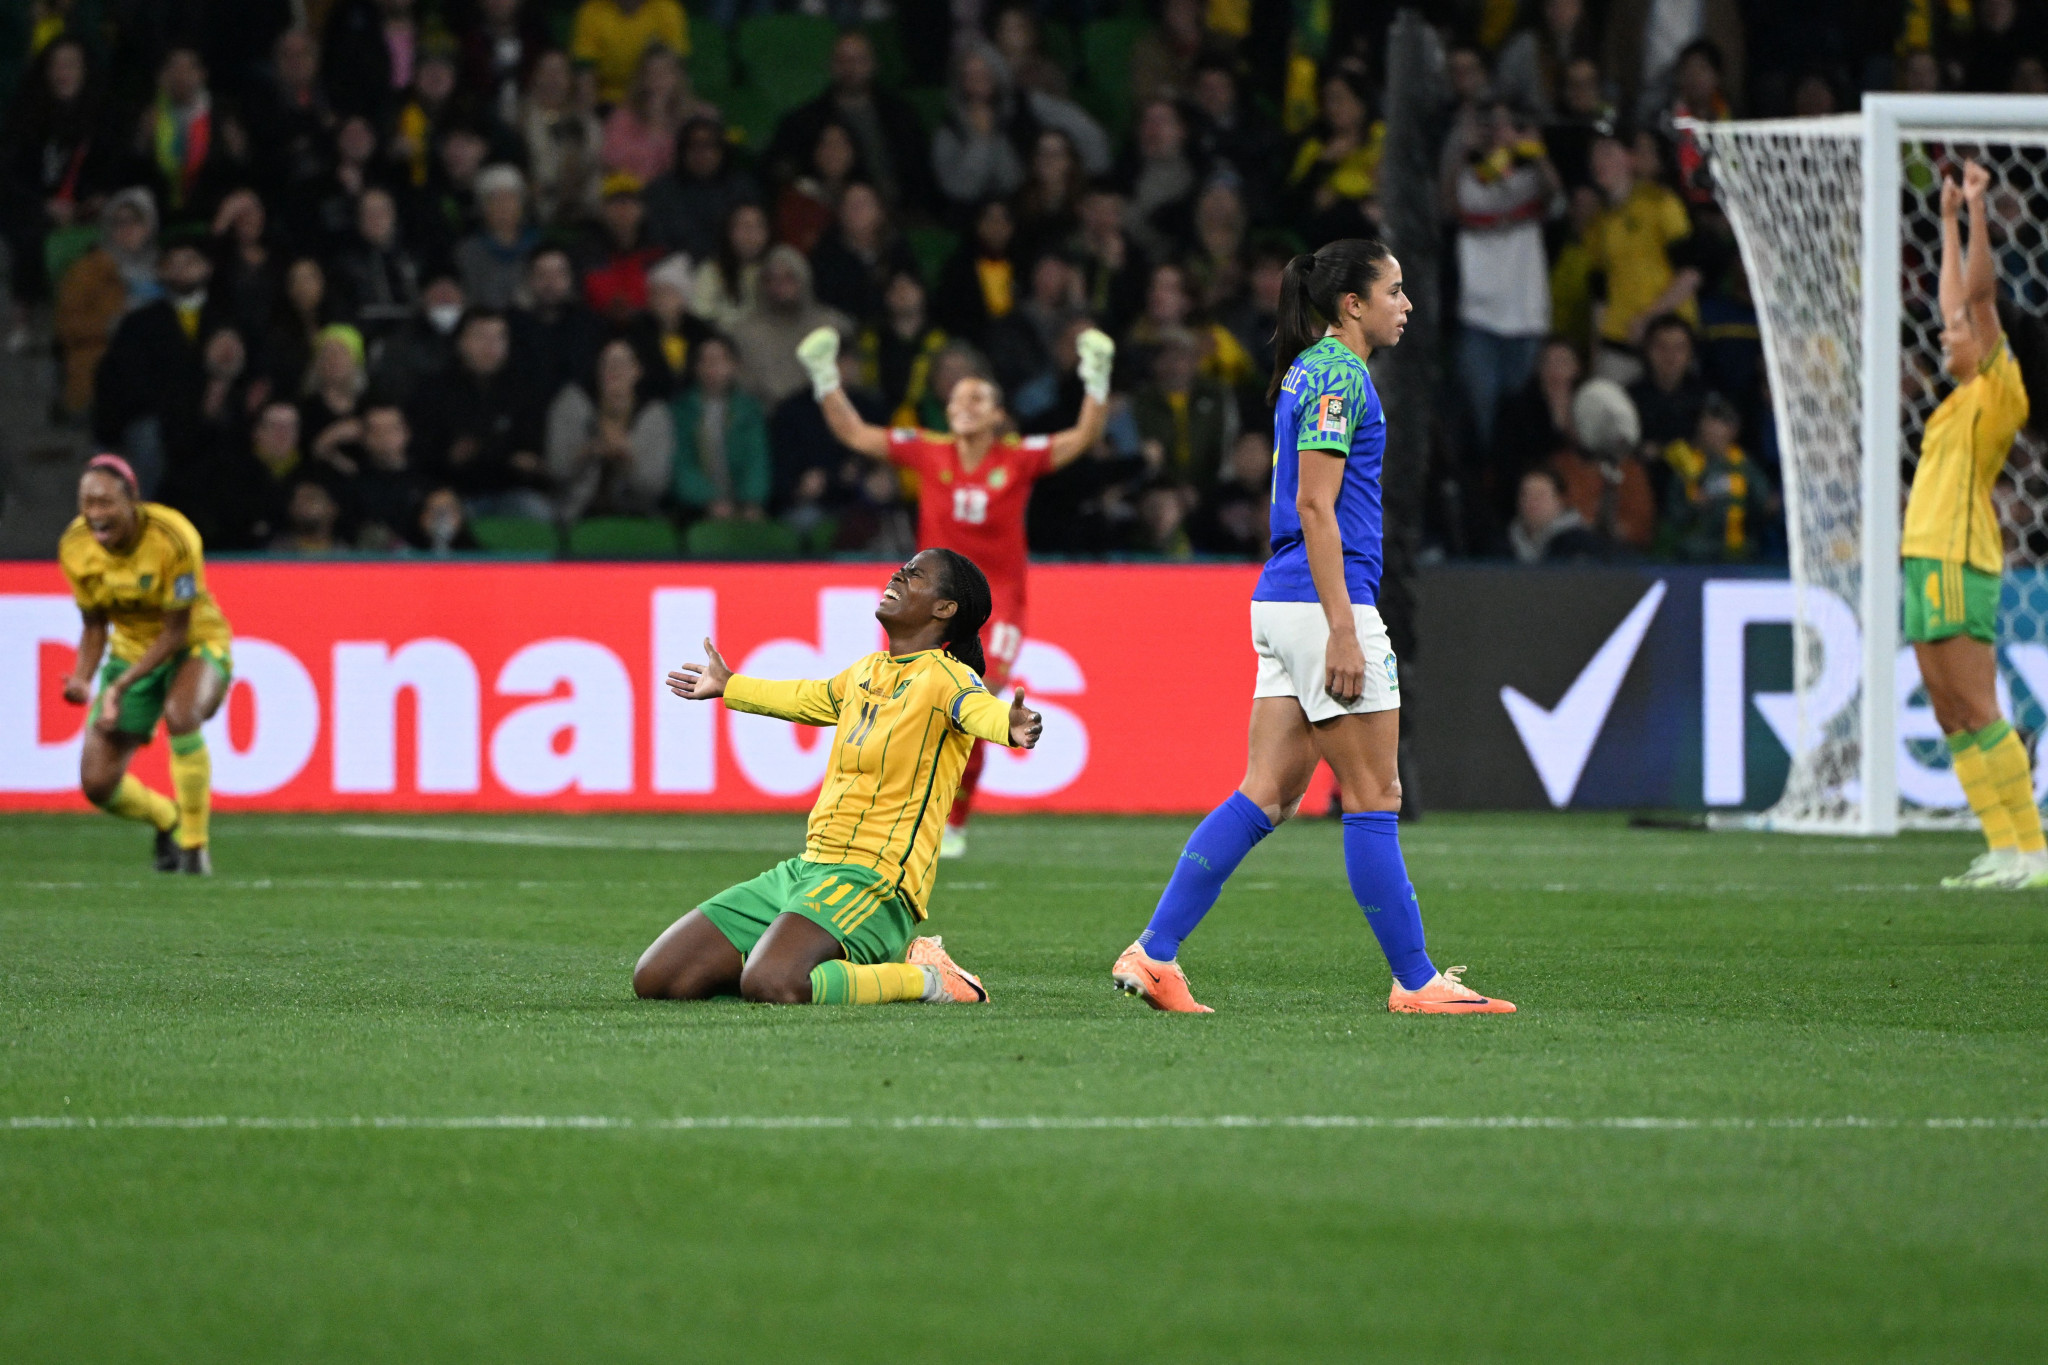 Jamaica ensured Brazil were eliminated from the FIFA Women's World Cup ©Getty Images